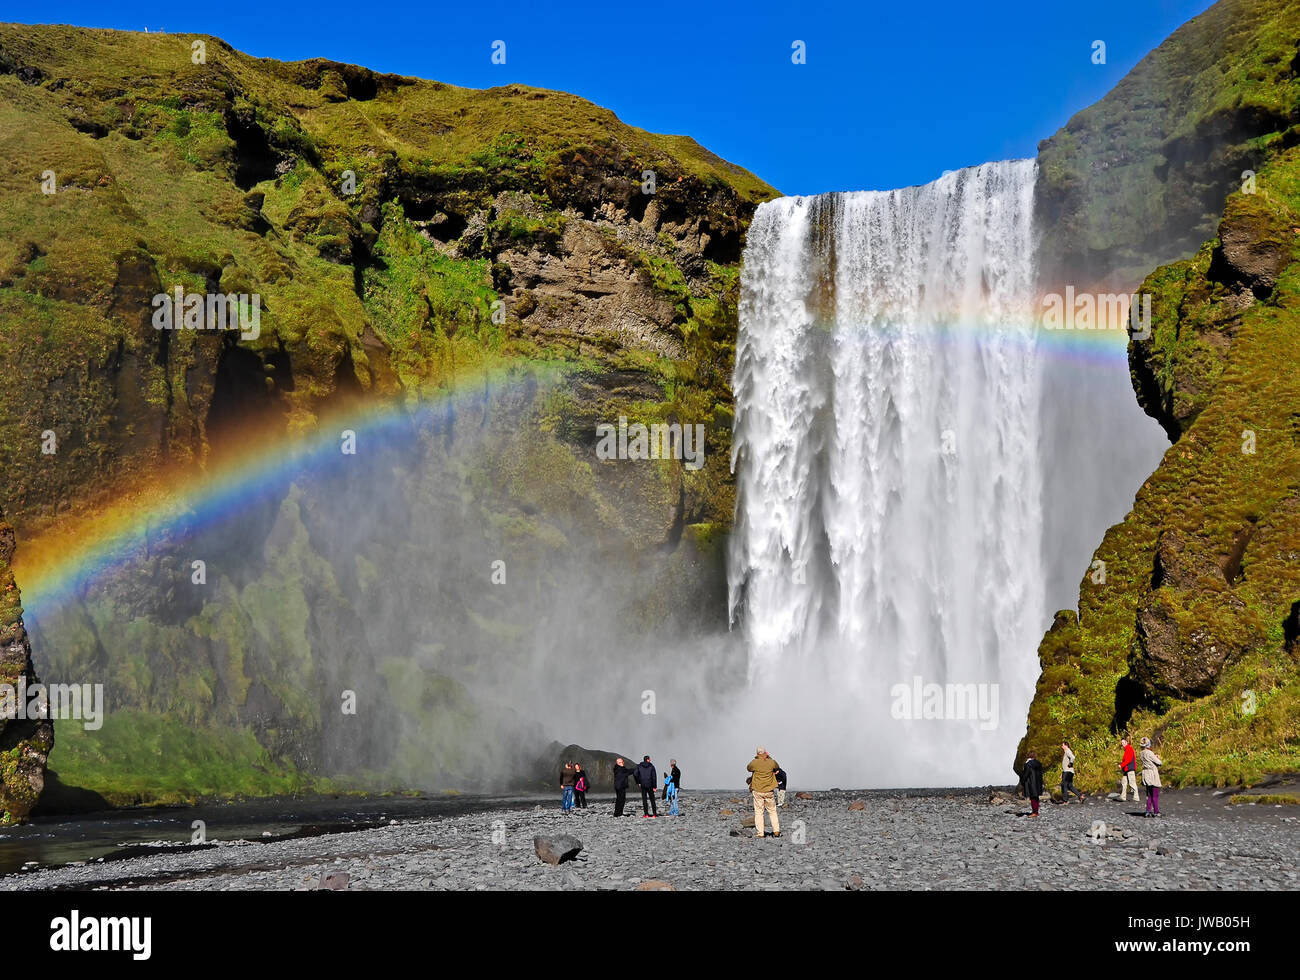 Skogafoss waterfall and rainbow with incidental tourists. Skogafoss is a waterfall situated on the Skoga River in the south of Iceland at the cliffs o Stock Photo